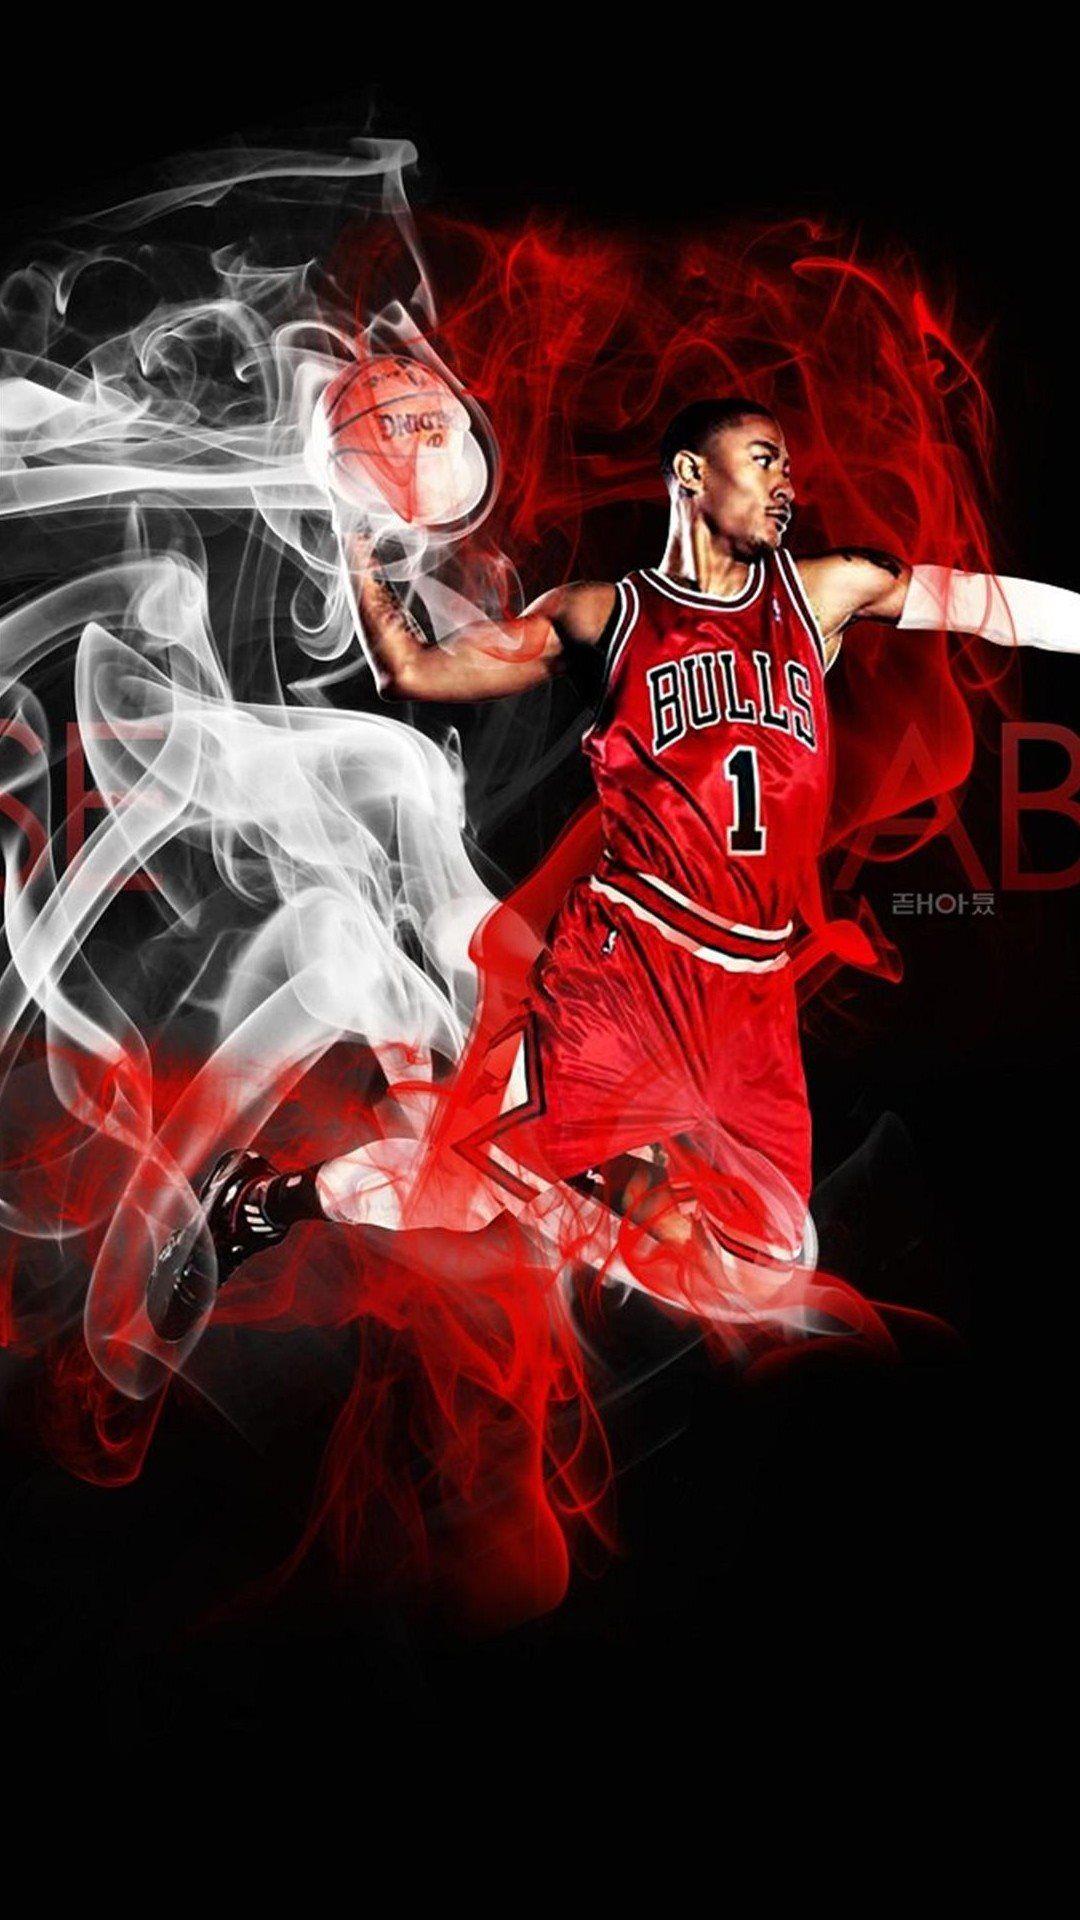 Download NBA Wallpaper For Android Gallery. Nba wallpaper, Derrick rose wallpaper, Derrick rose